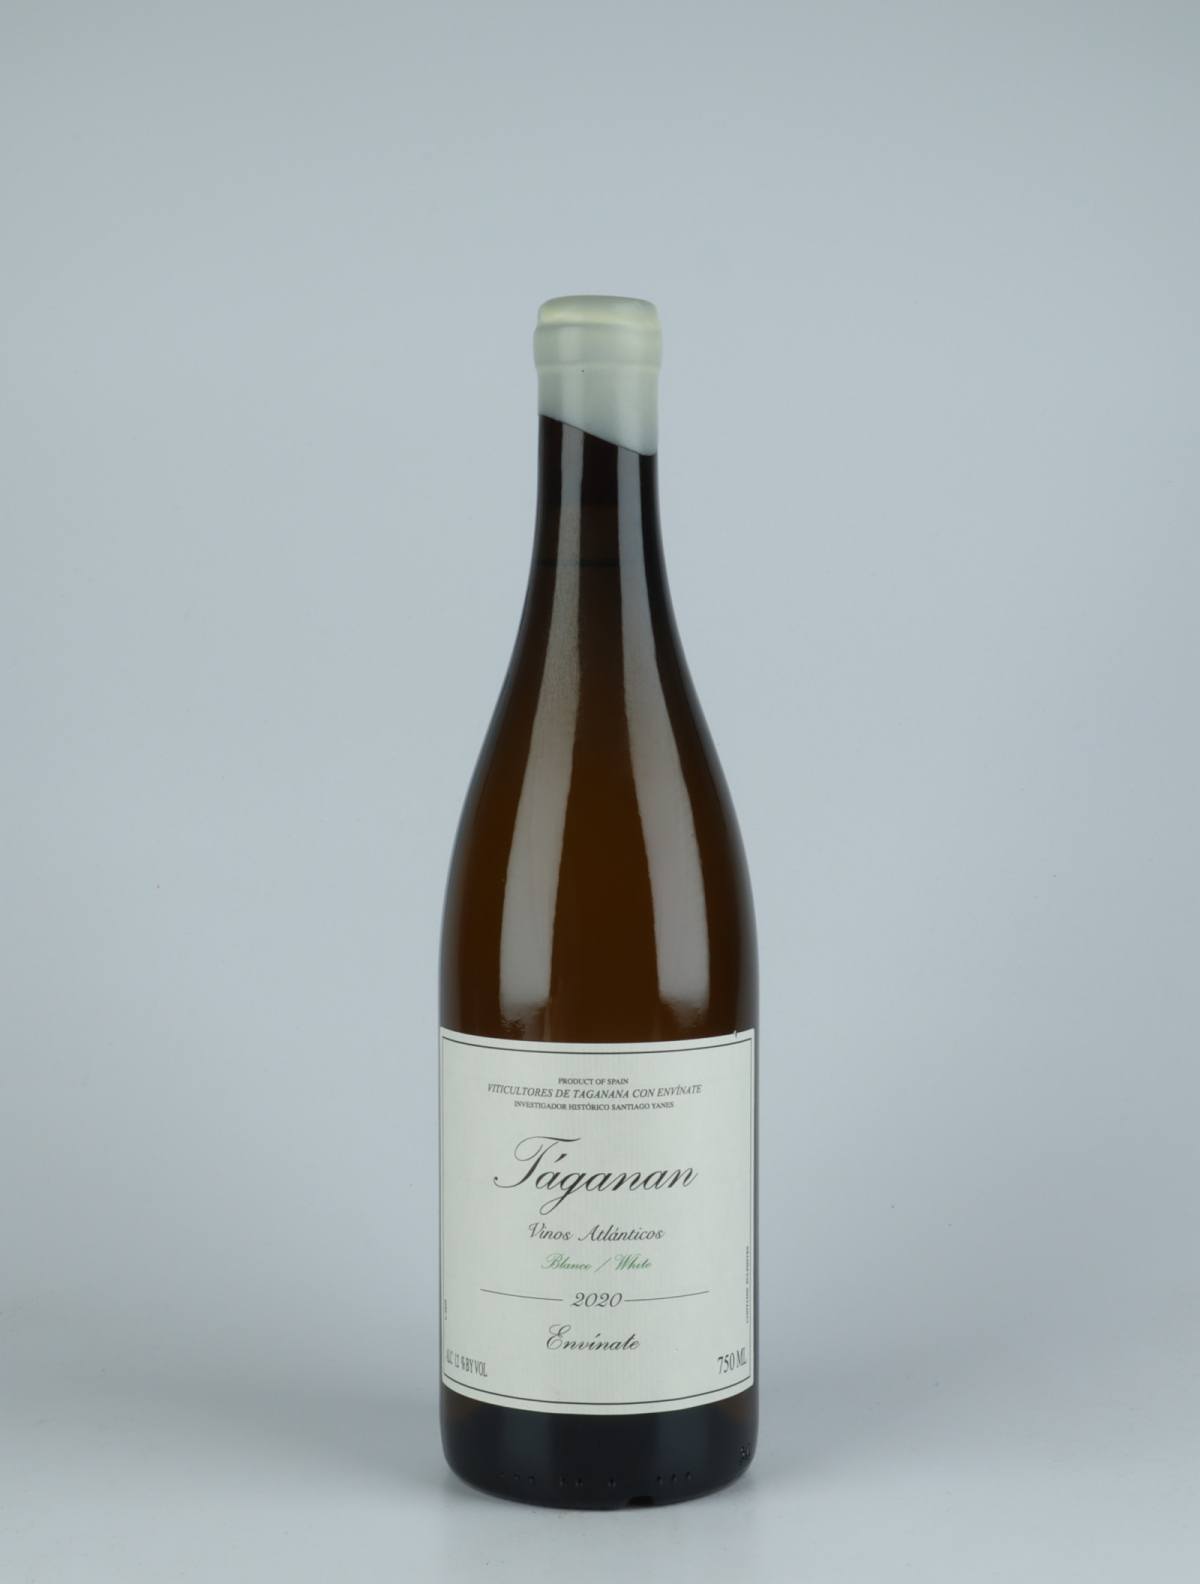 A bottle 2020 Taganan Blanco - Tenerife White wine from Envínate,  in Spain